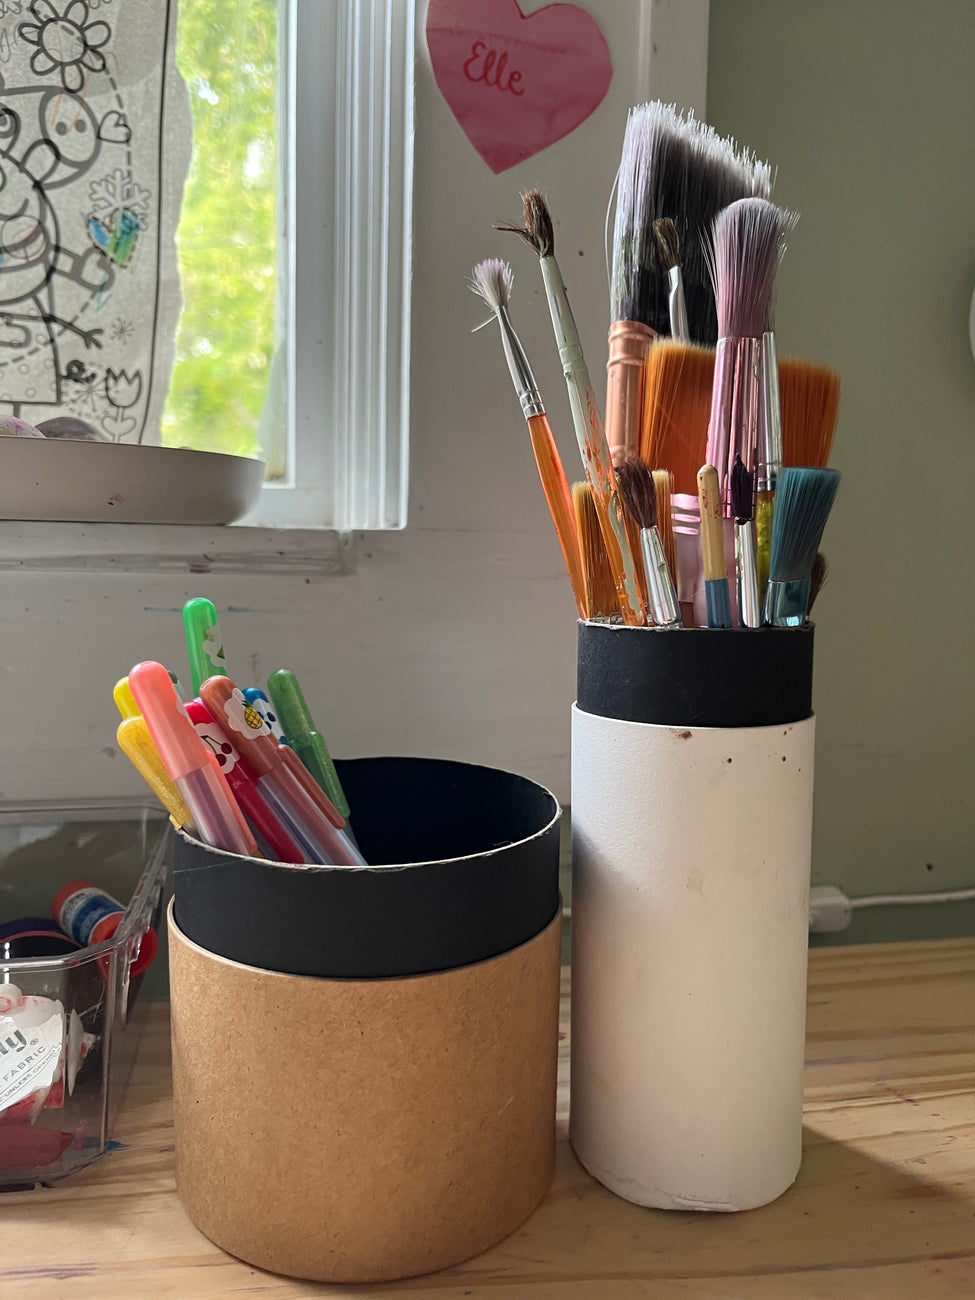 paint brushes and pencils in tea tubes